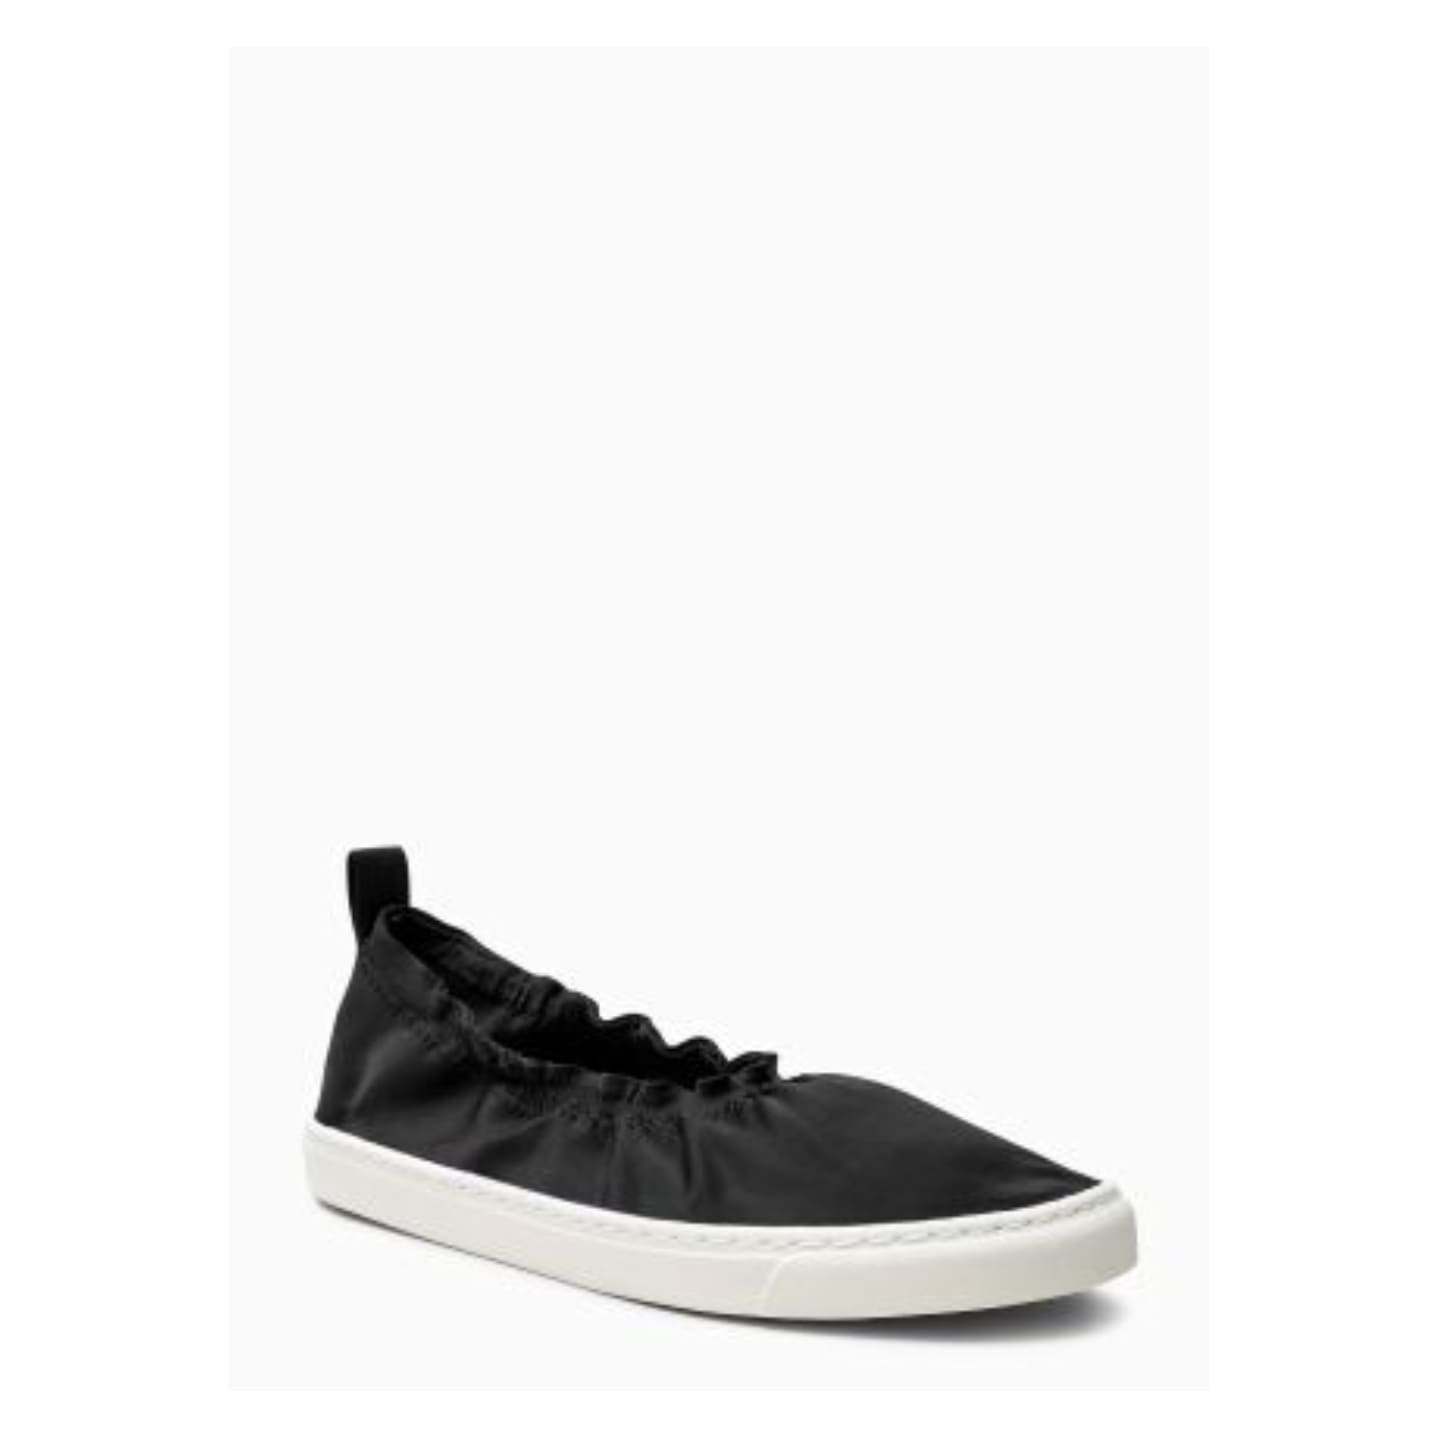 Next Black Sporty Womens Ballerinas - Stockpoint Apparel Outlet